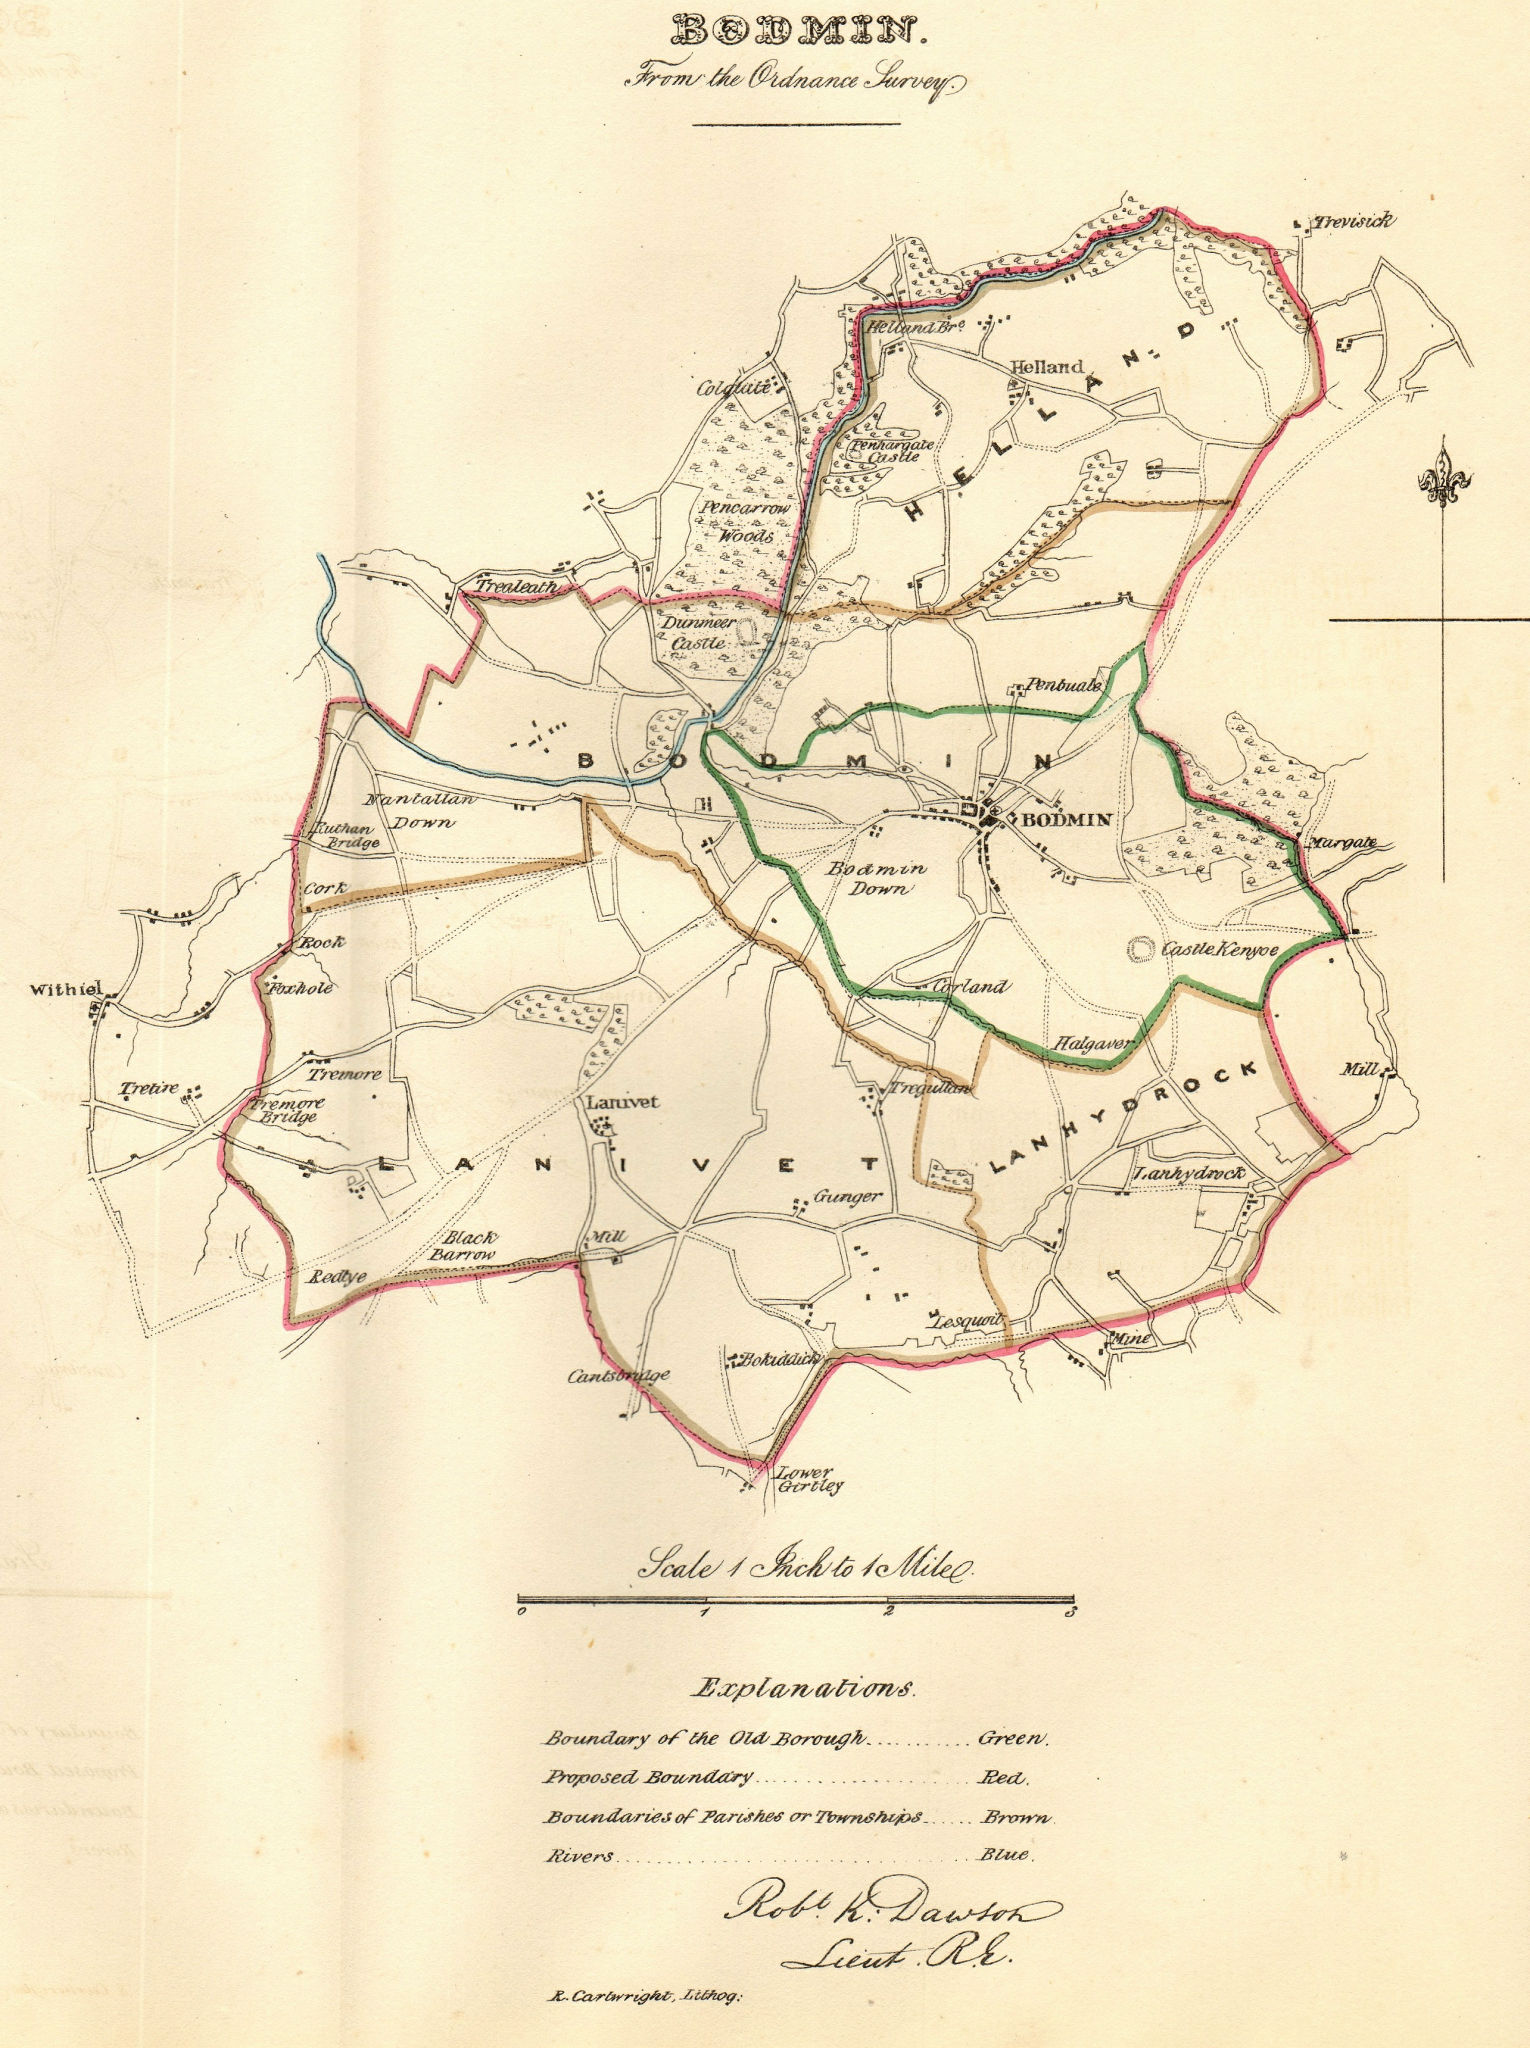 Associate Product BODMIN borough/town plan. REFORM ACT. Cornwall. DAWSON 1832 old antique map